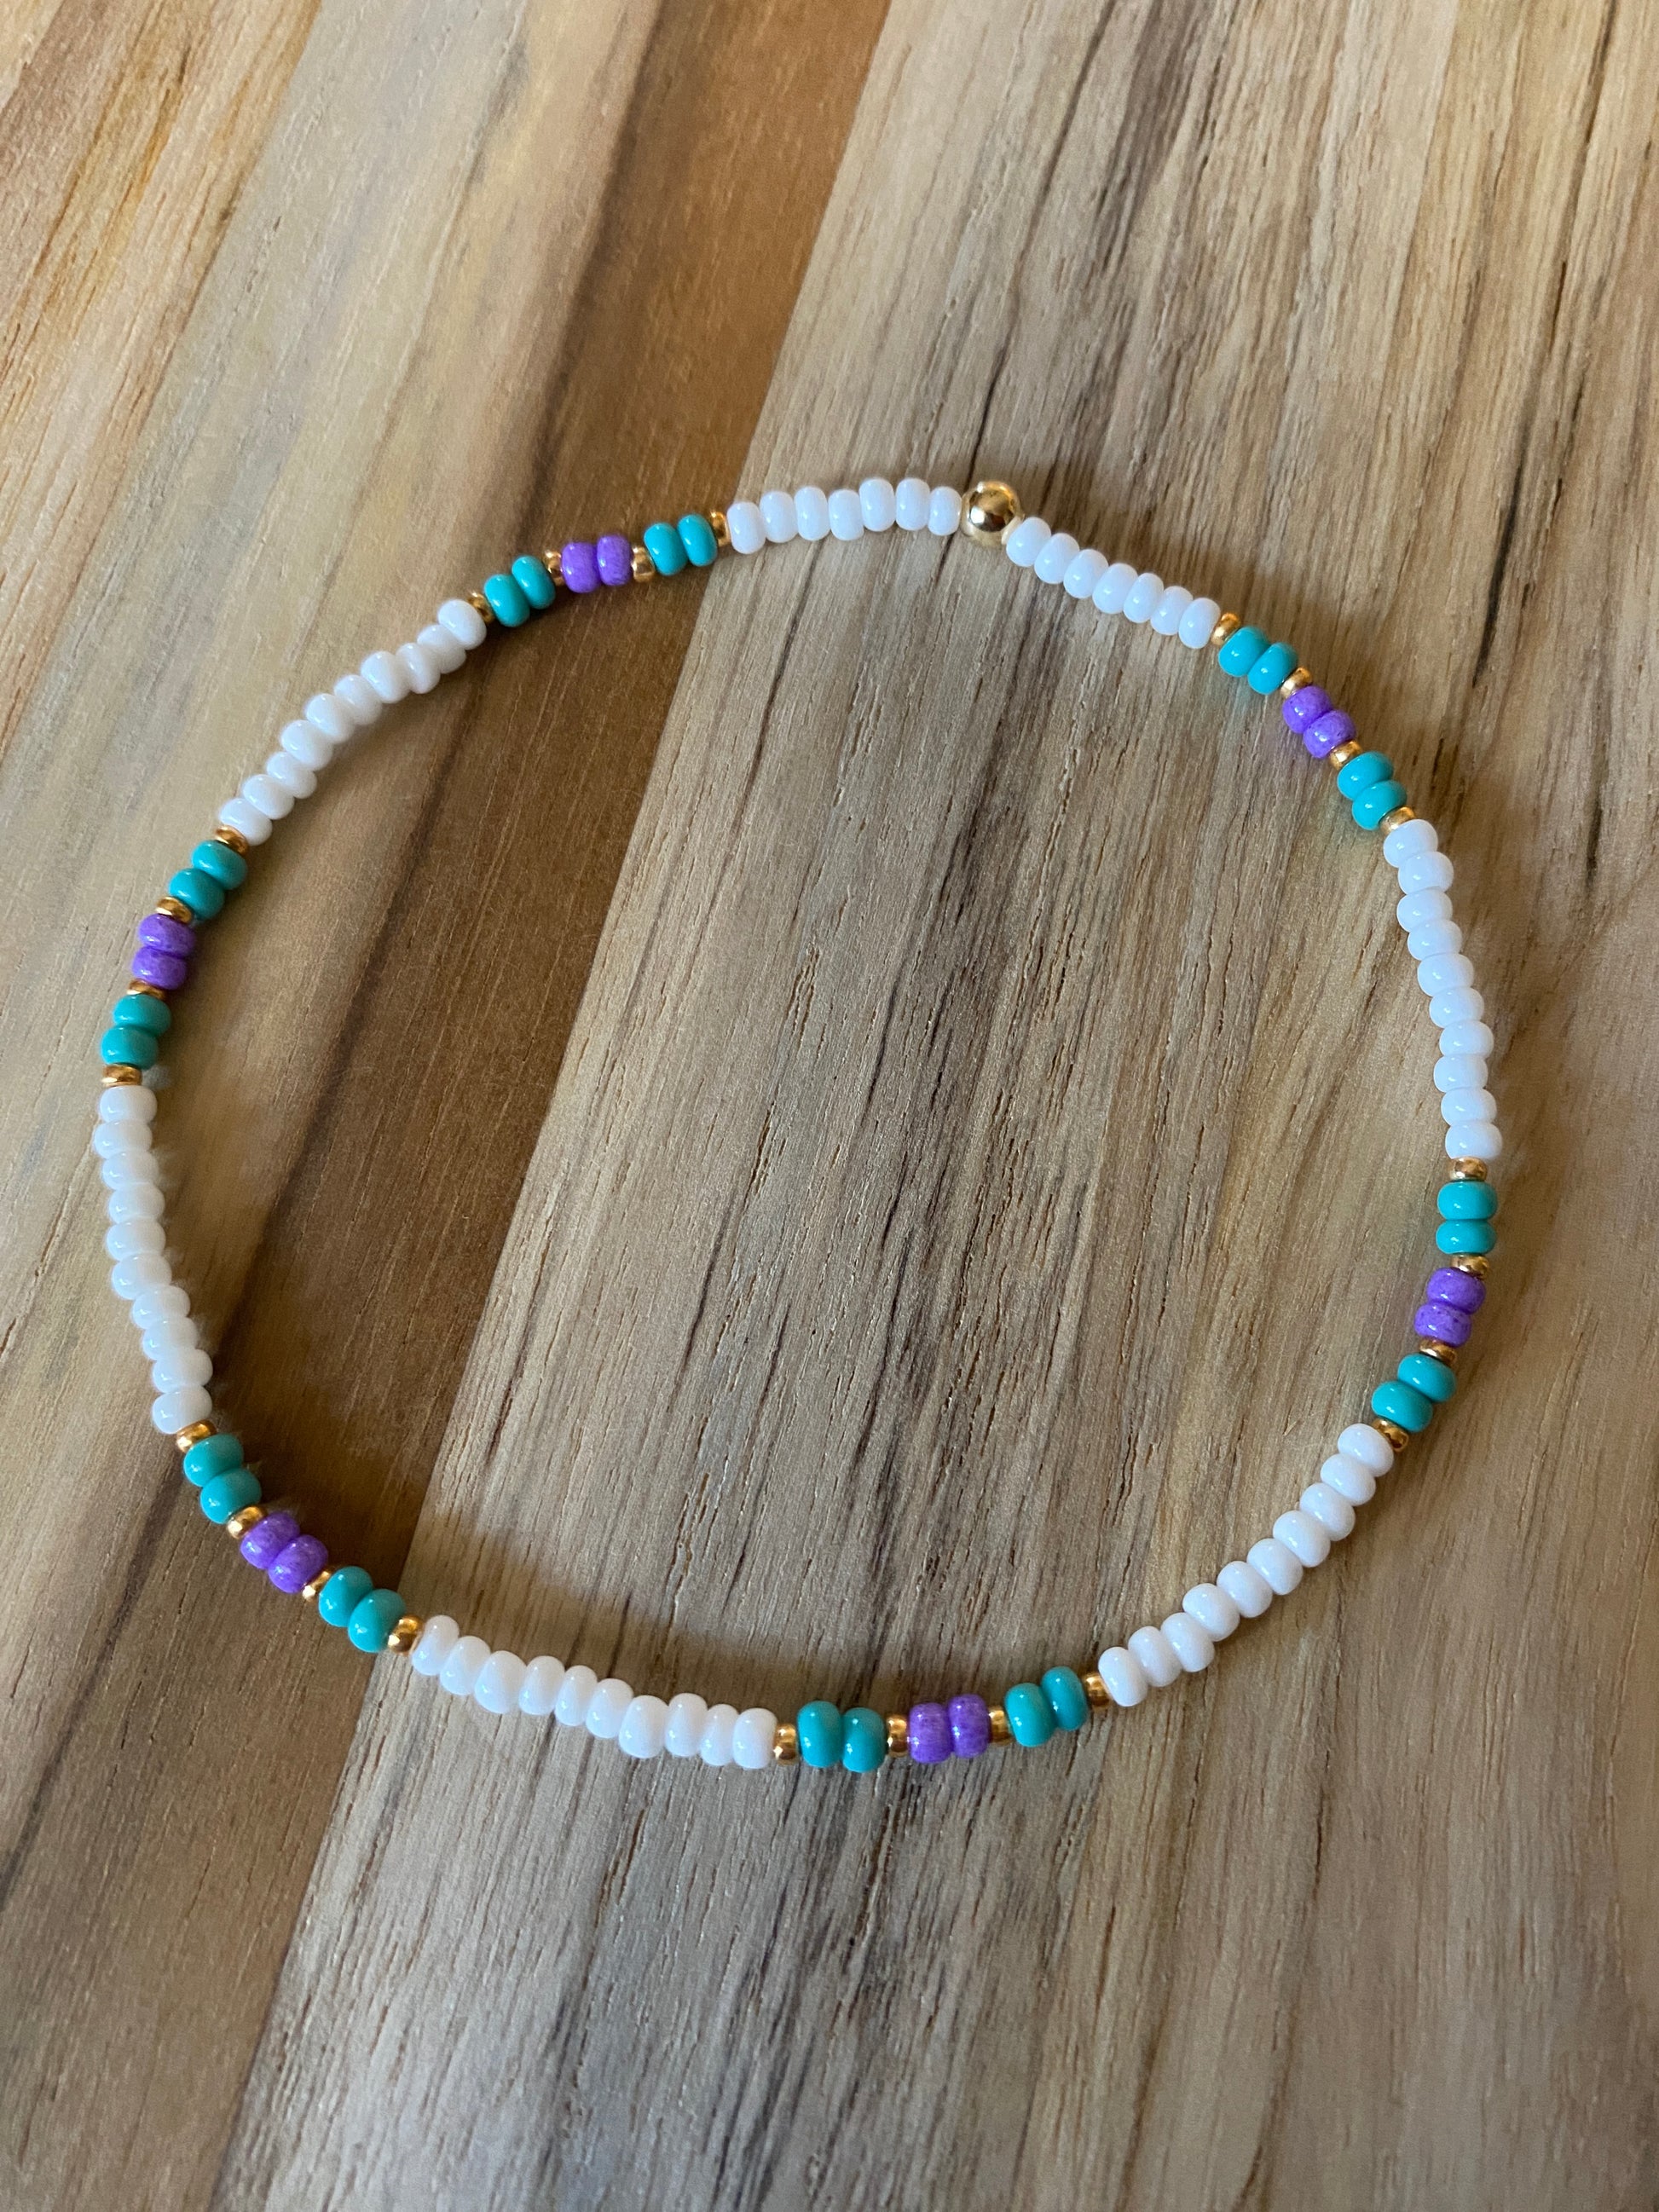 Dainty Beach Vibe White Seed Bead Ankle Bracelet Anklet with Purple and Turquoise Accents - My Urban Gems